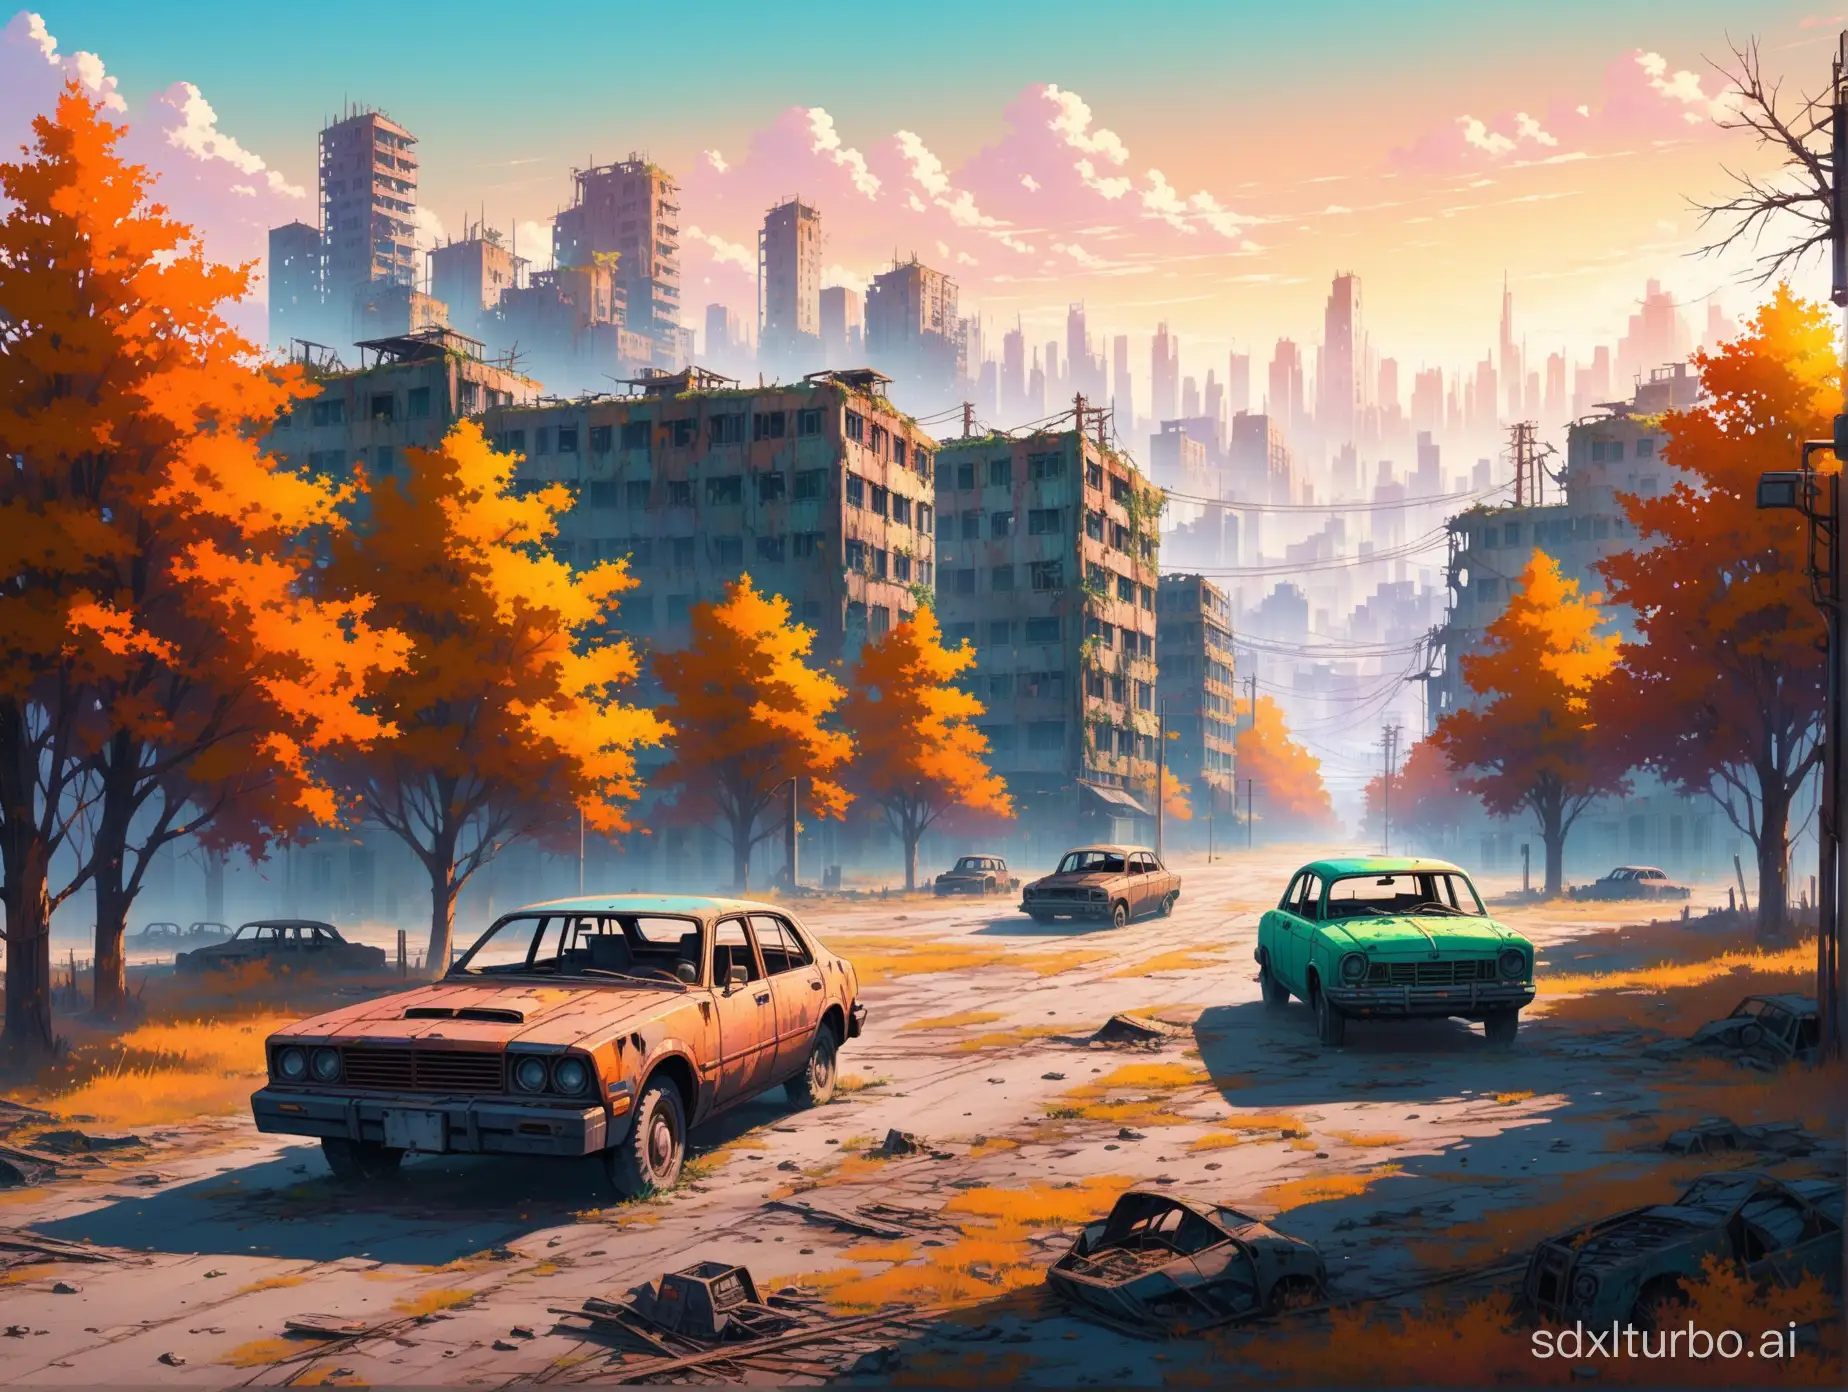 far away view of colorful post-apocalyptic city with trees and abandoned car